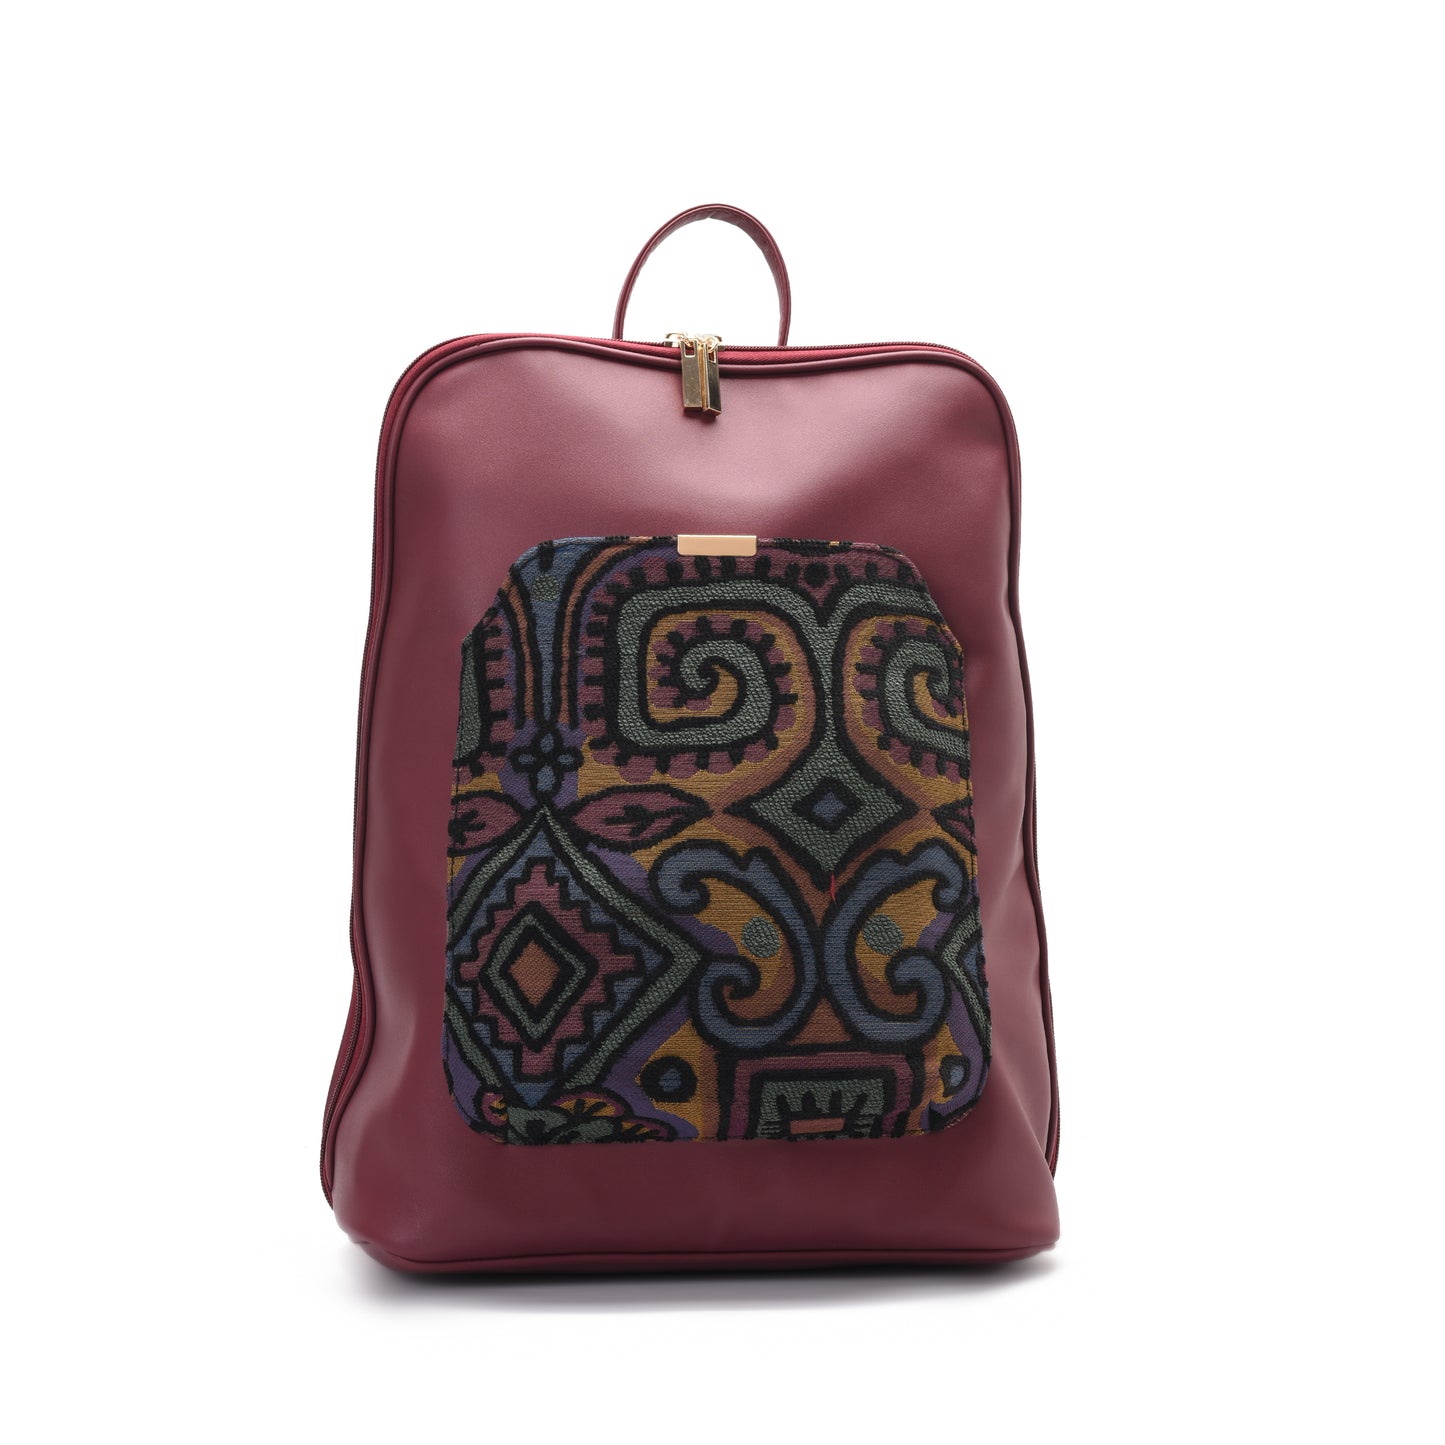 Laptop Burgundy with colourful fabric Backpack/Cross- Code 2003